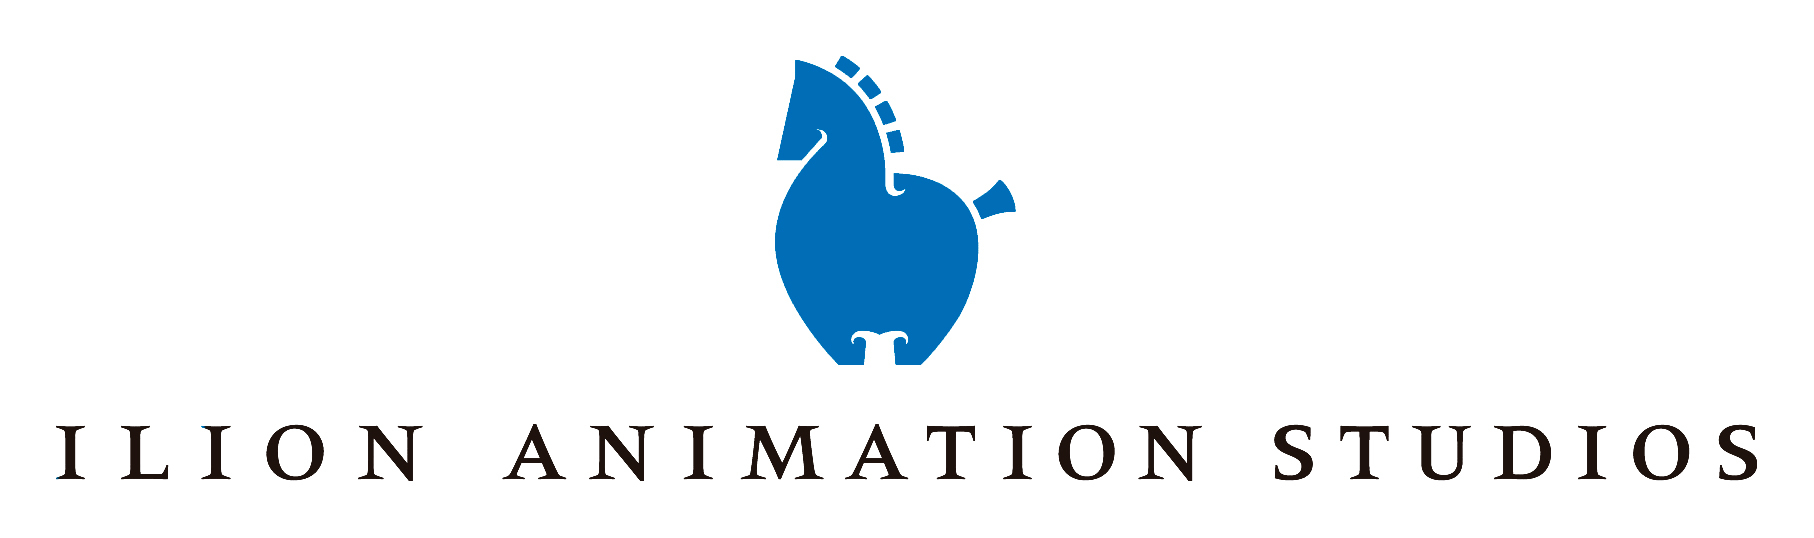 Skydance Media Forms Multi-Year Partnership with Spain's Ilion Animation  Studios to Produce Slate of High-End Animated Feature Films and Television  Series | Business Wire